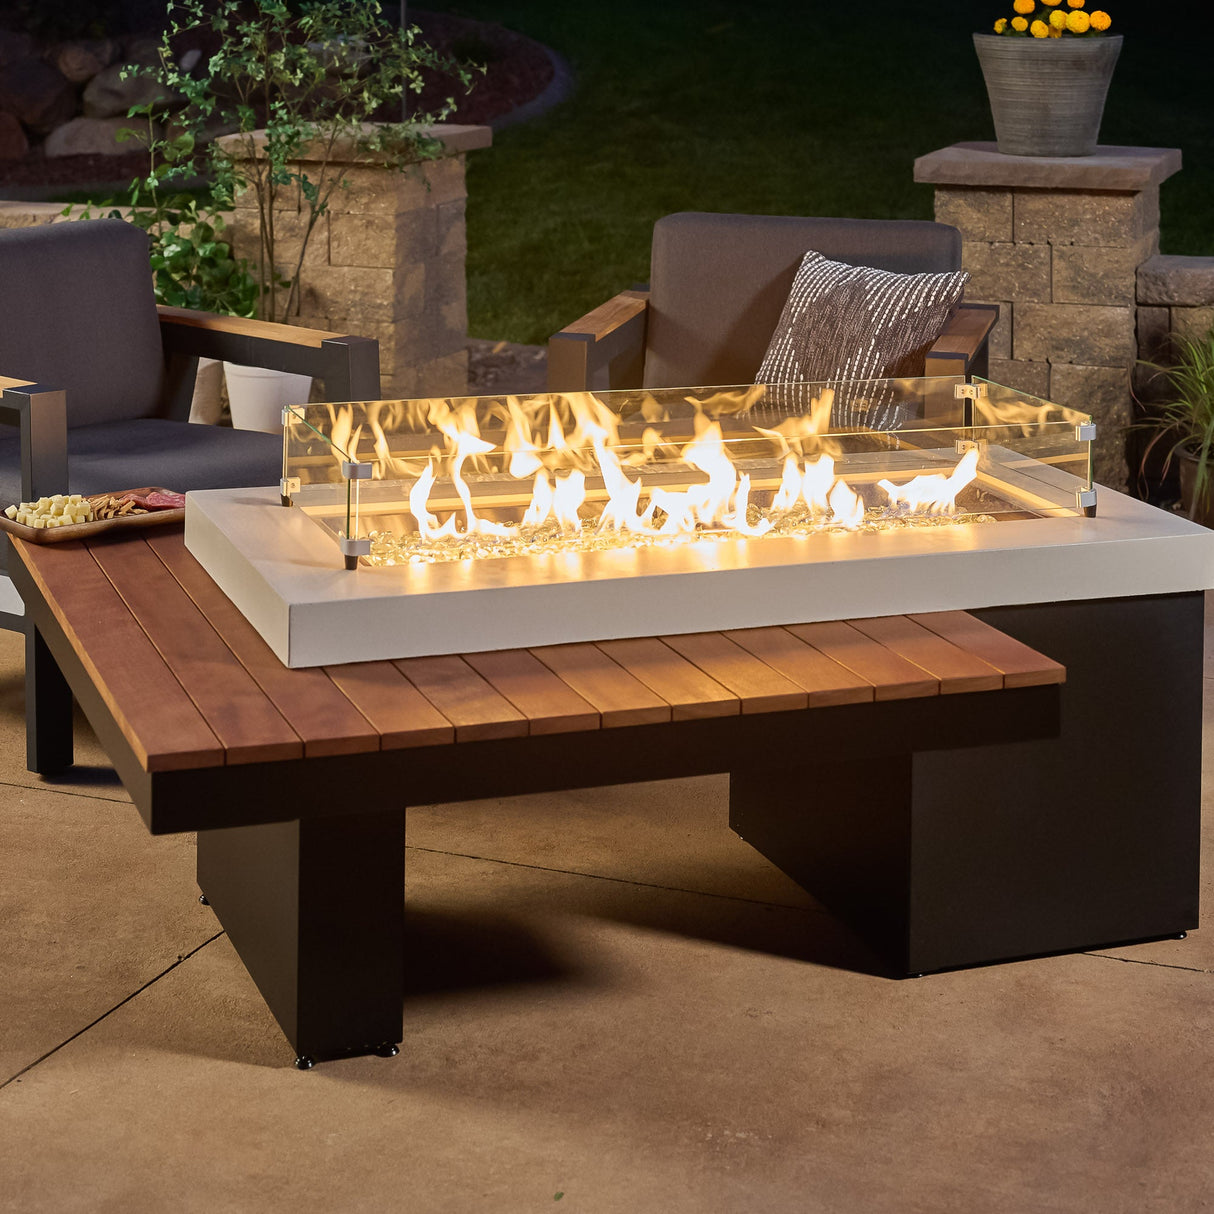 A glass wind guard placed on the top of the Uptown Iroko Linear Gas Fire Pit Table along with some food on the edge